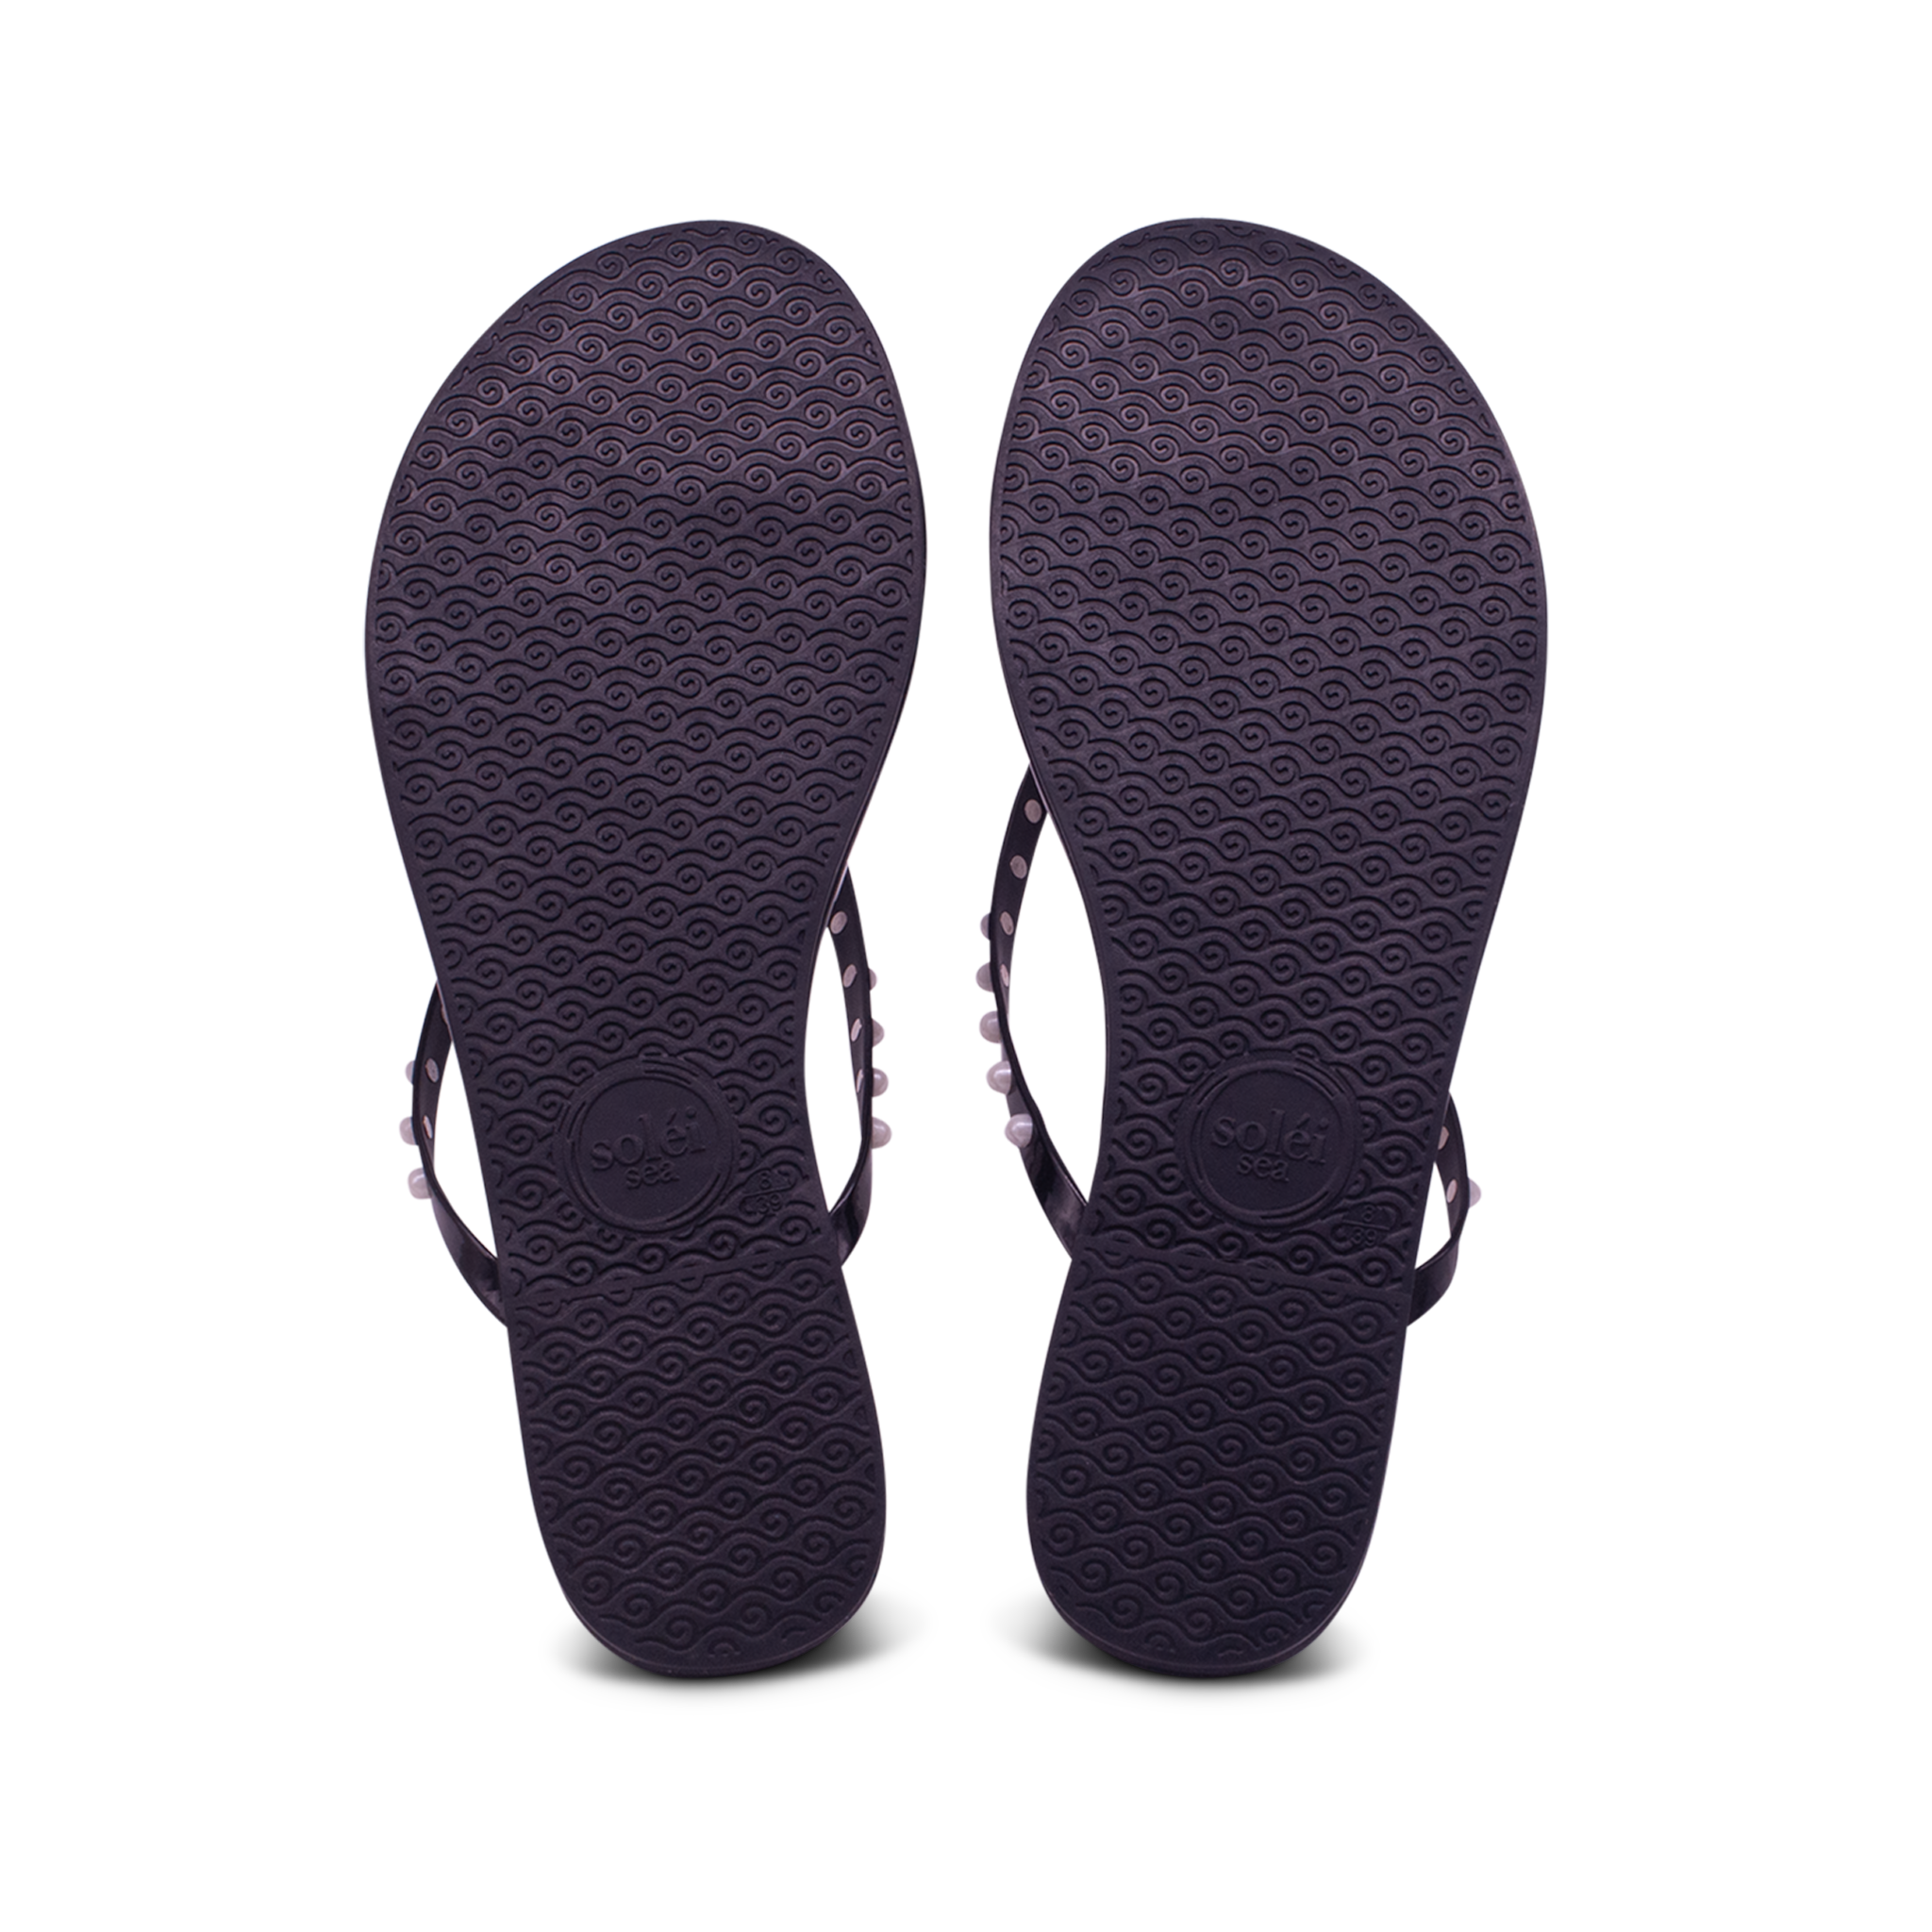 Indie Black Patent with White Pearl Sandal